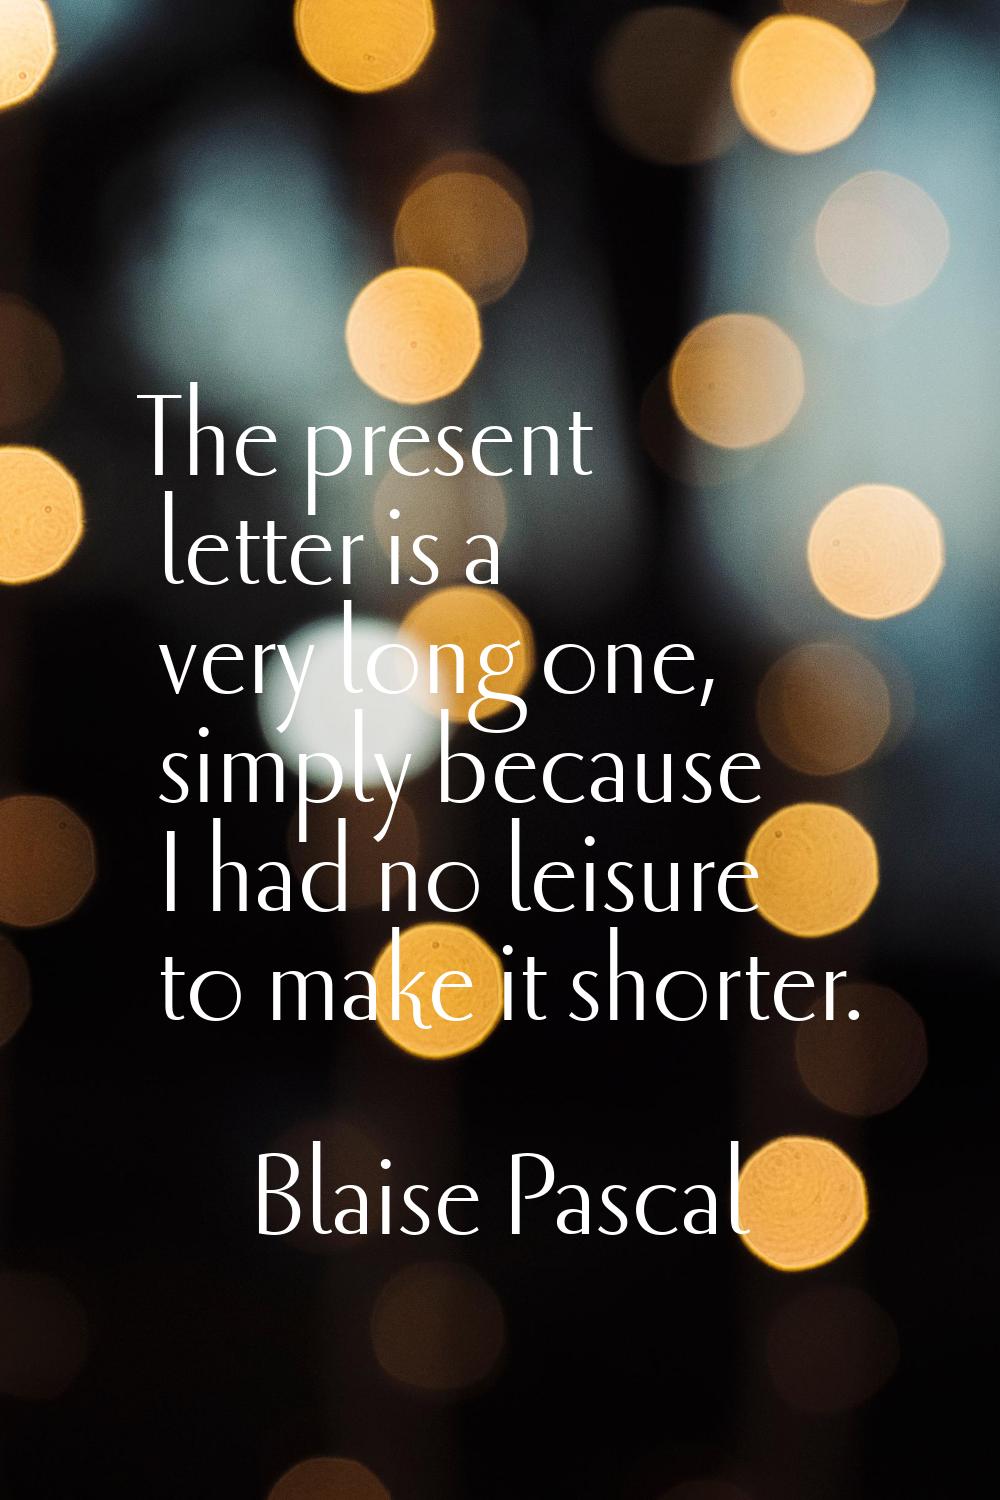 The present letter is a very long one, simply because I had no leisure to make it shorter.